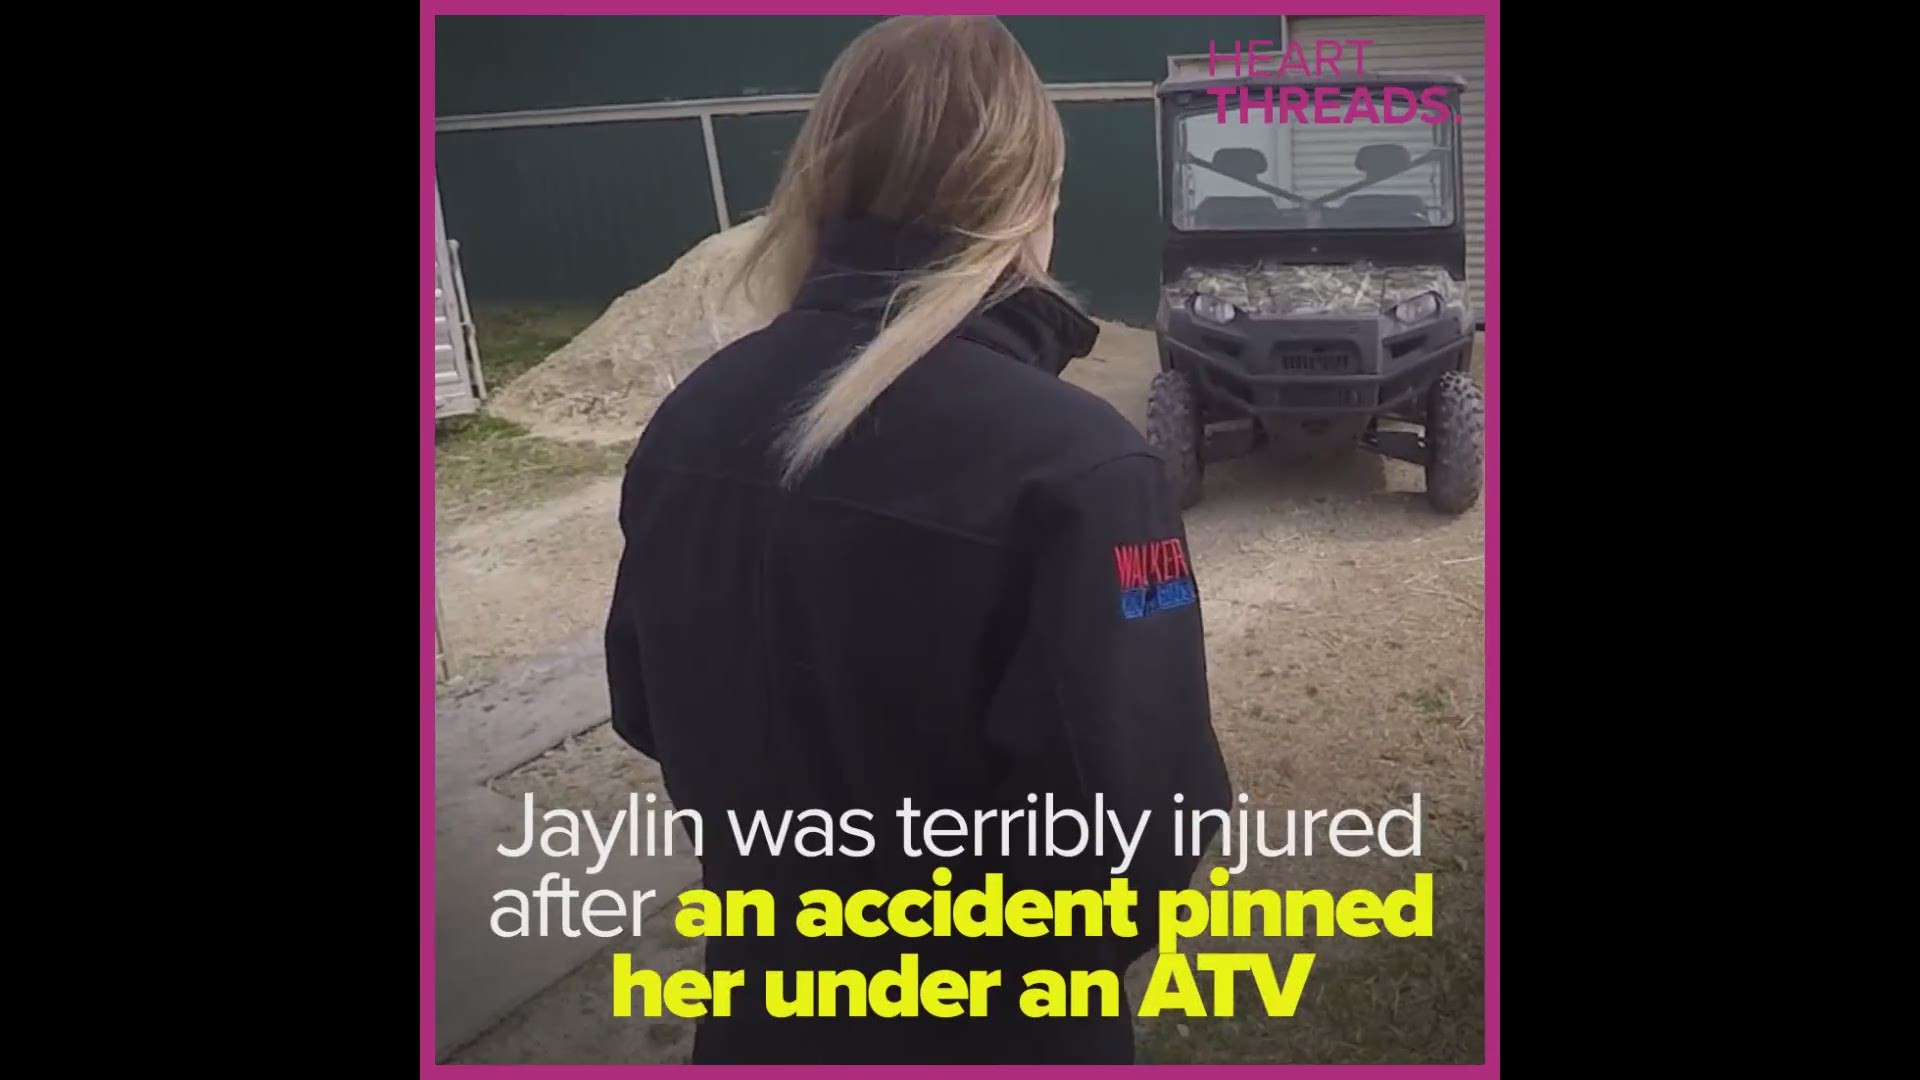 A terrible accident put Jaylin at risk of losing her leg, but Dr. Ming saved it. After 2 years and 9 surgeries, Jaylin was walking again and Dr. Ming had one more surprise for his patient.